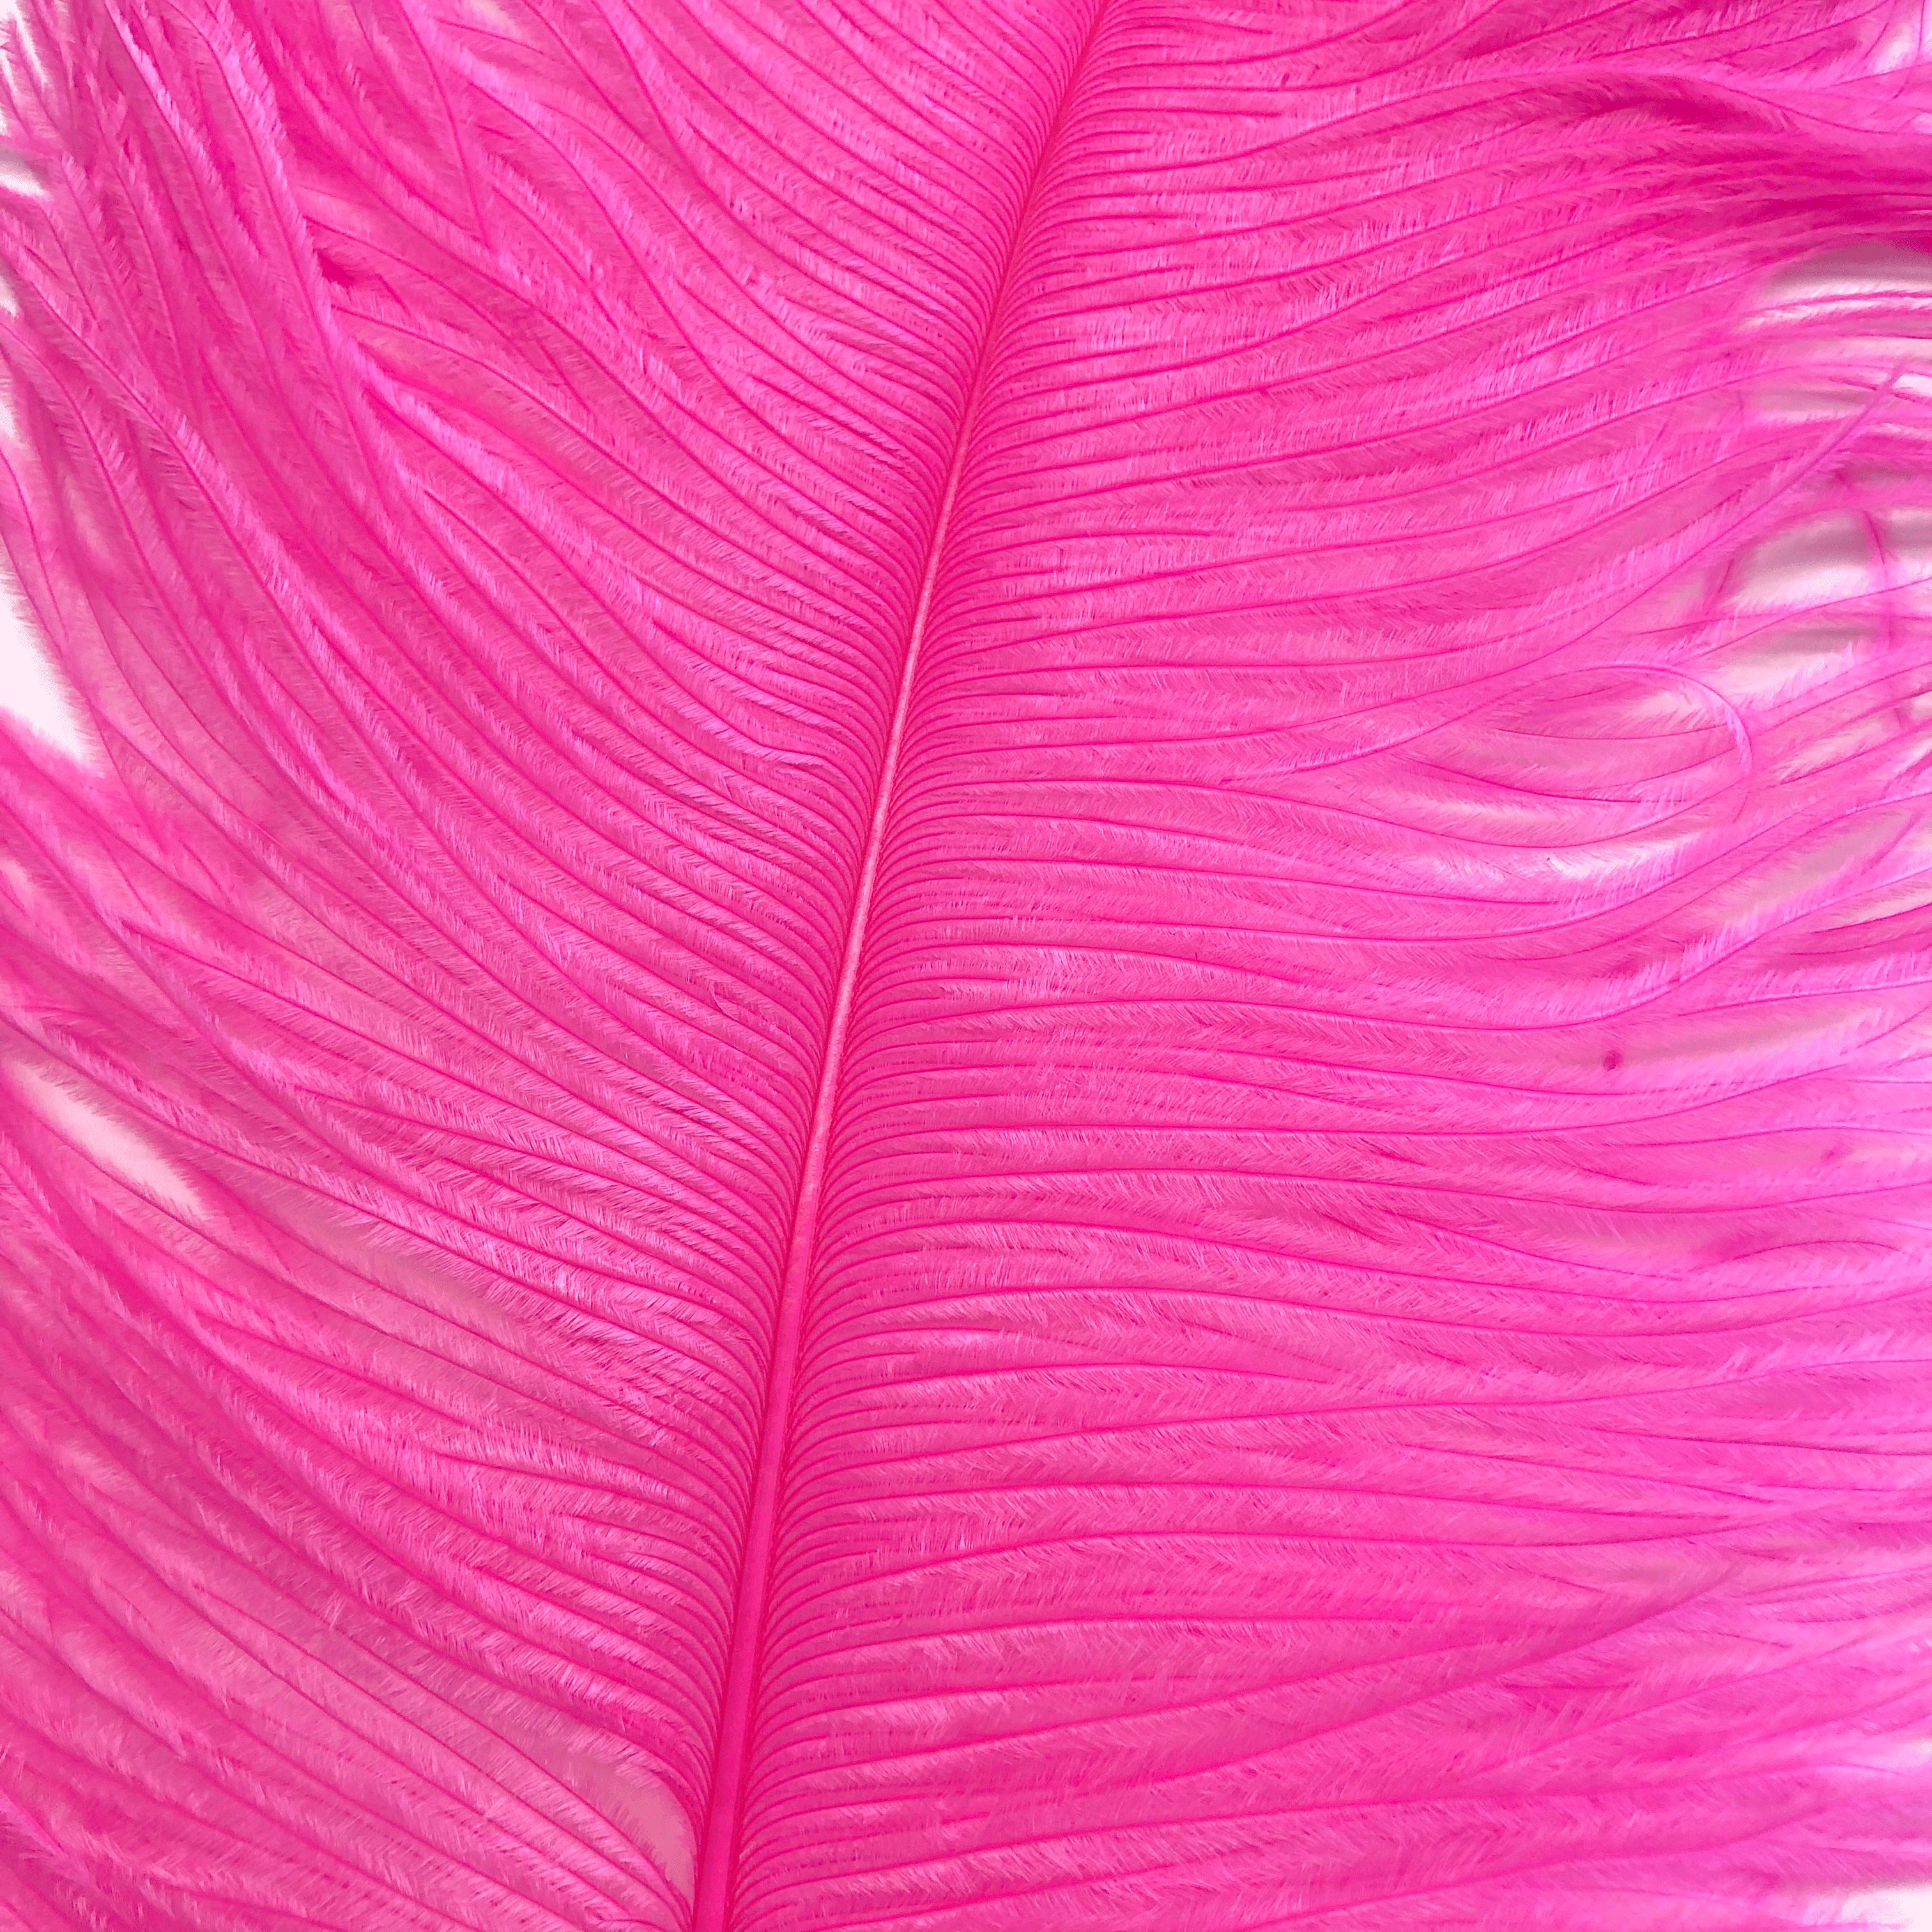 Ostrich Wing Feather Plumes 60-65cm (24-26") - Hot Pink